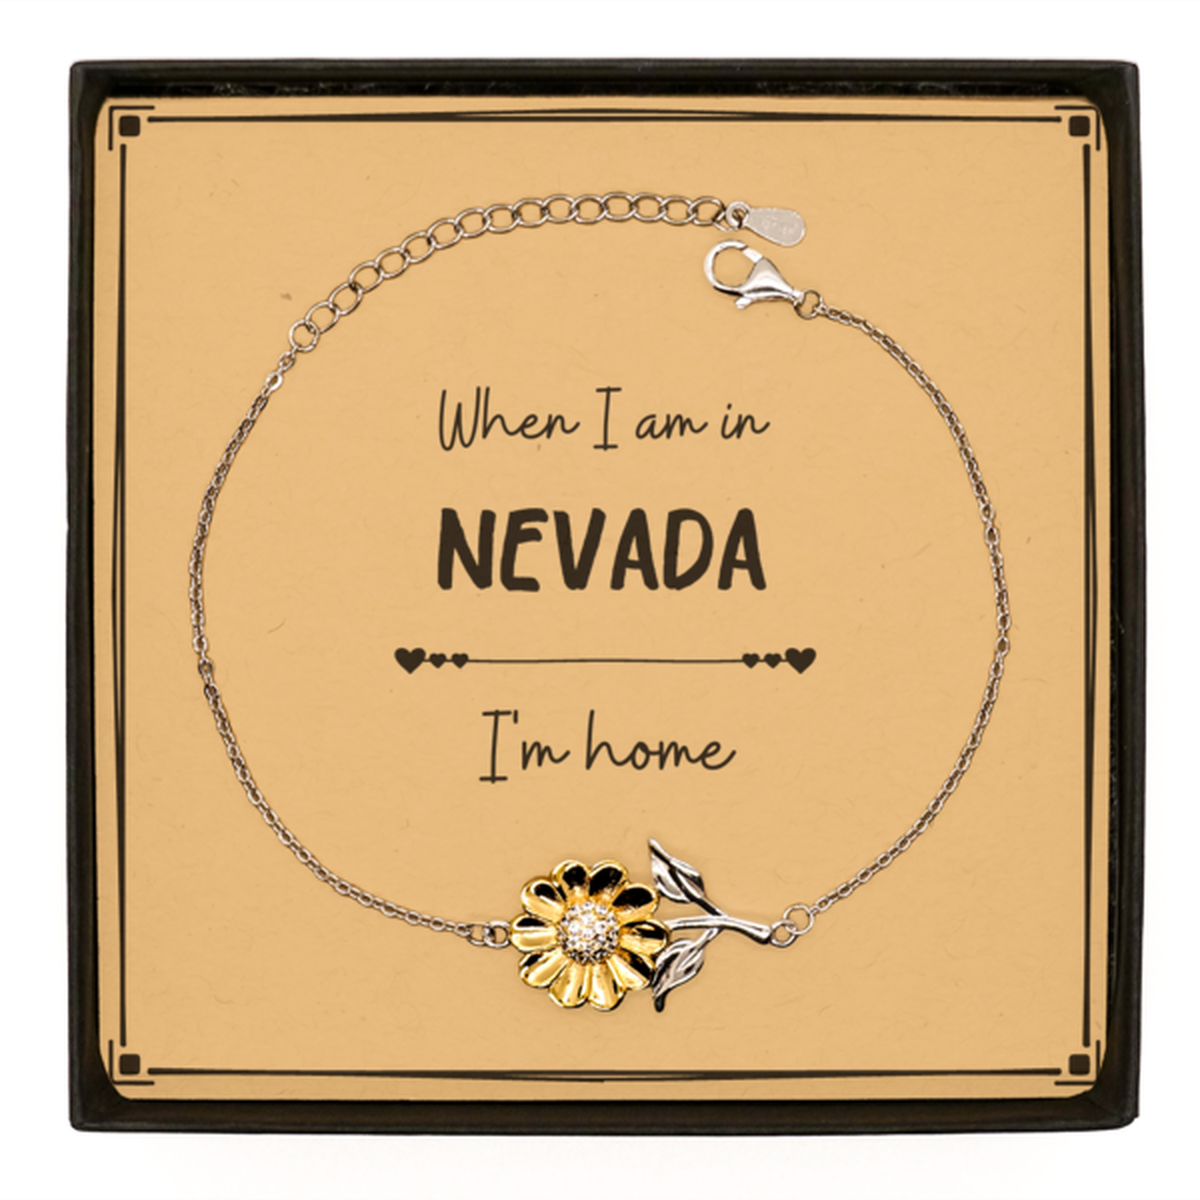 When I am in Nevada I'm home Sunflower Bracelet, Message Card Gifts For Nevada, State Nevada Birthday Gifts for Friends Coworker